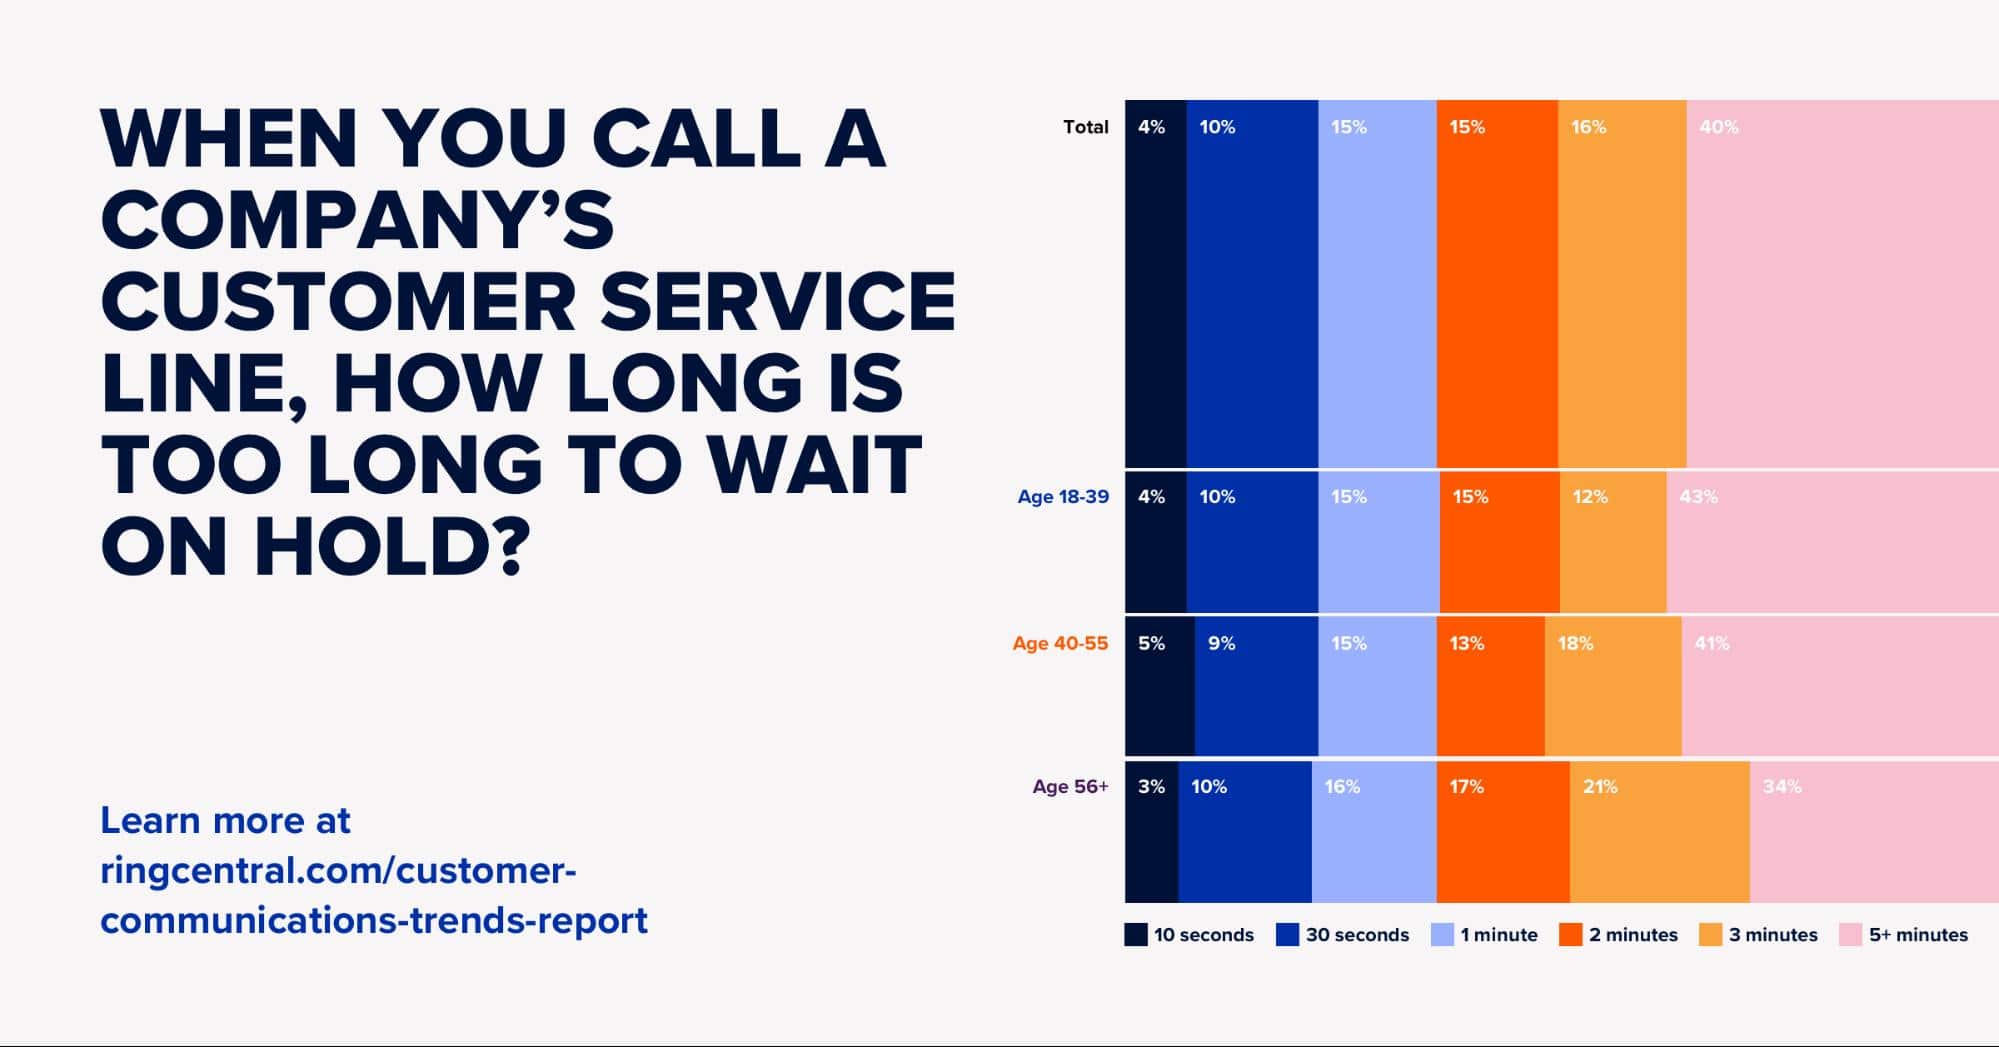 Graph: When you call a company's customer service line, how long is too long to wait on hold?